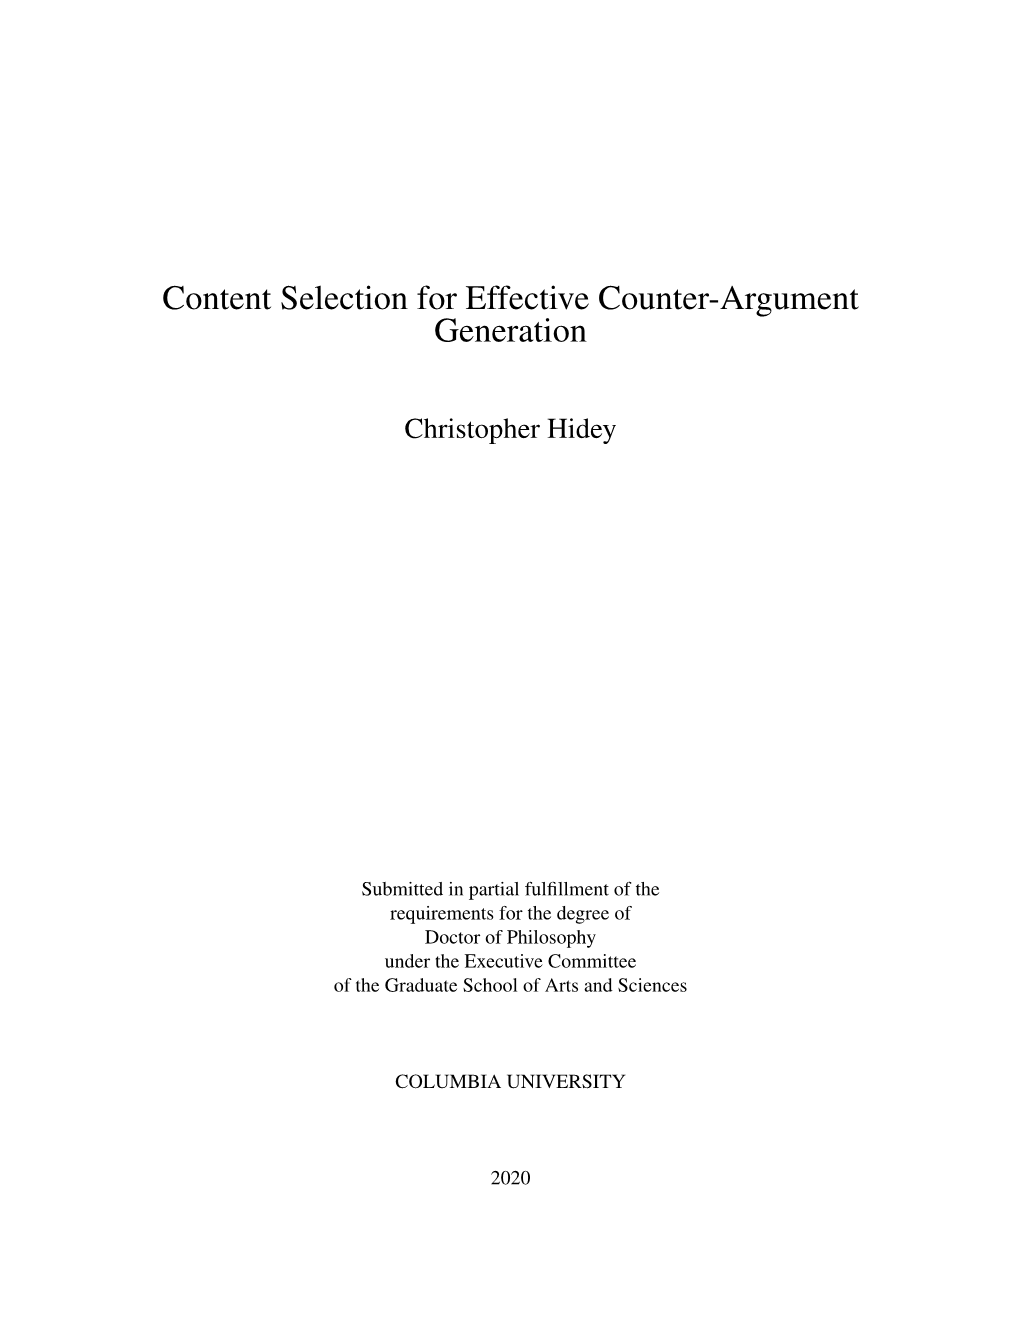 Content Selection for Effective Counter-Argument Generation